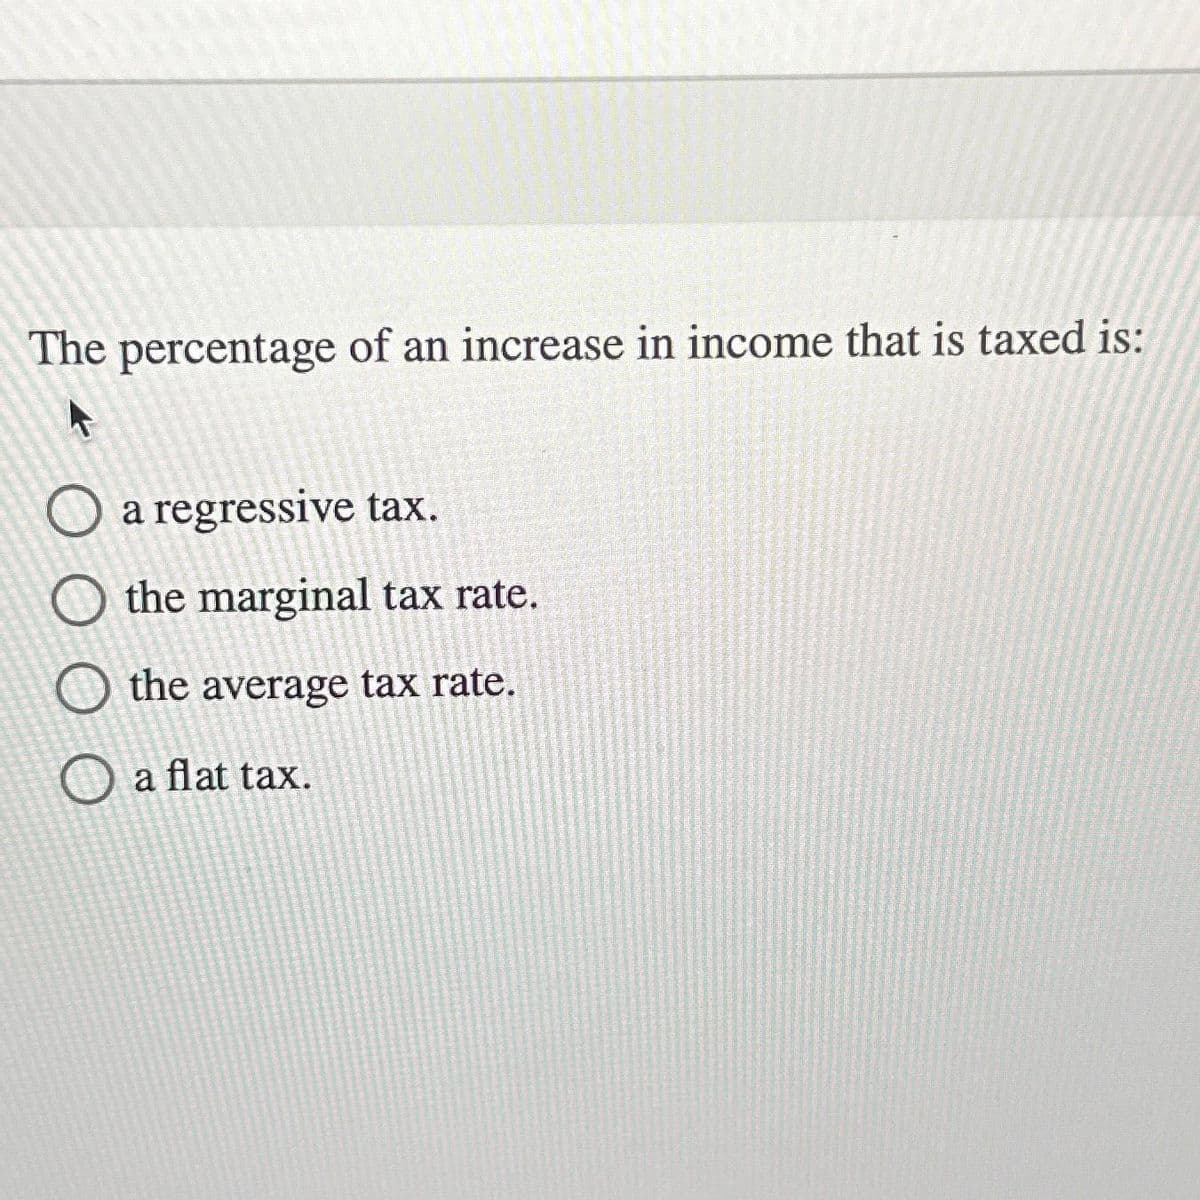 The percentage of an increase in income that is taxed is:
O a regressive tax.
O the marginal tax rate.
O the average tax rate.
O a flat tax.